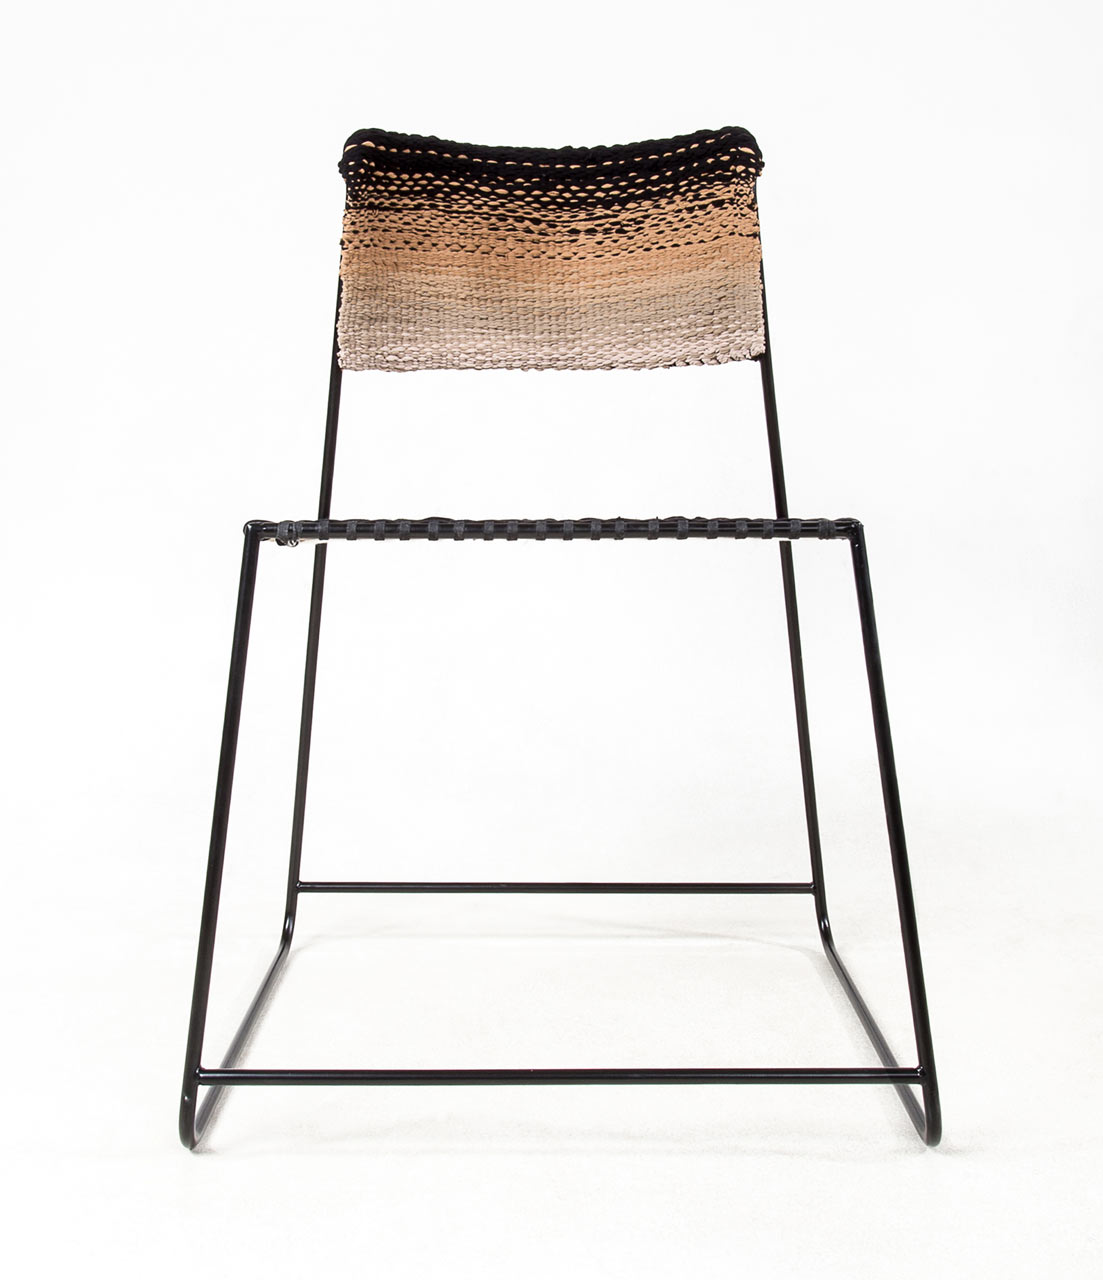 A Chair Made From Recycled Tights